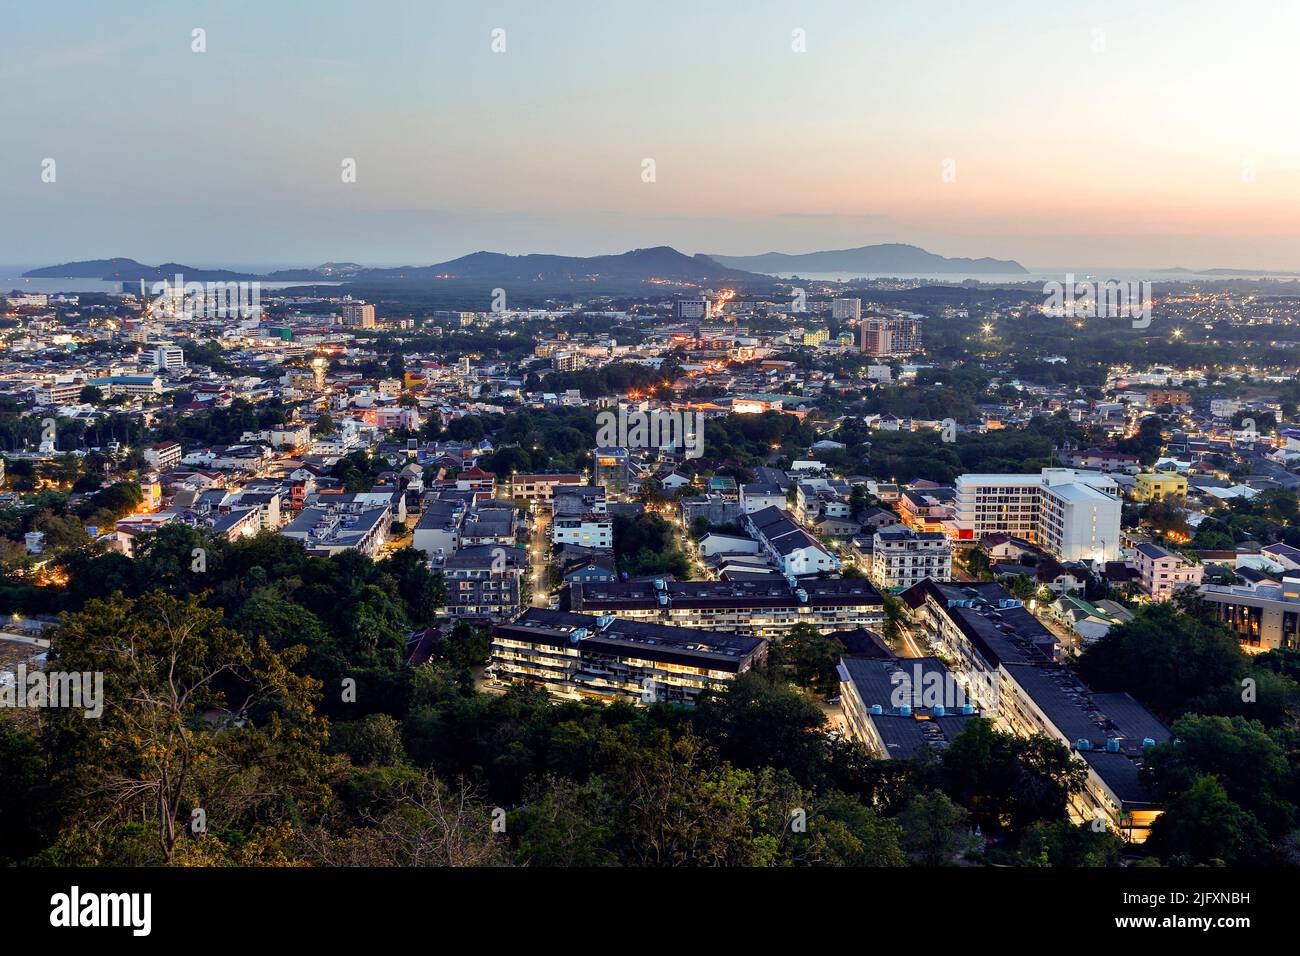 View of Phuket Town cityscape at dusk from Rang Hill (English) also known as Khao Rang (Thai). Phuket Town is the capital of Phuket Province in southe Stock Photo